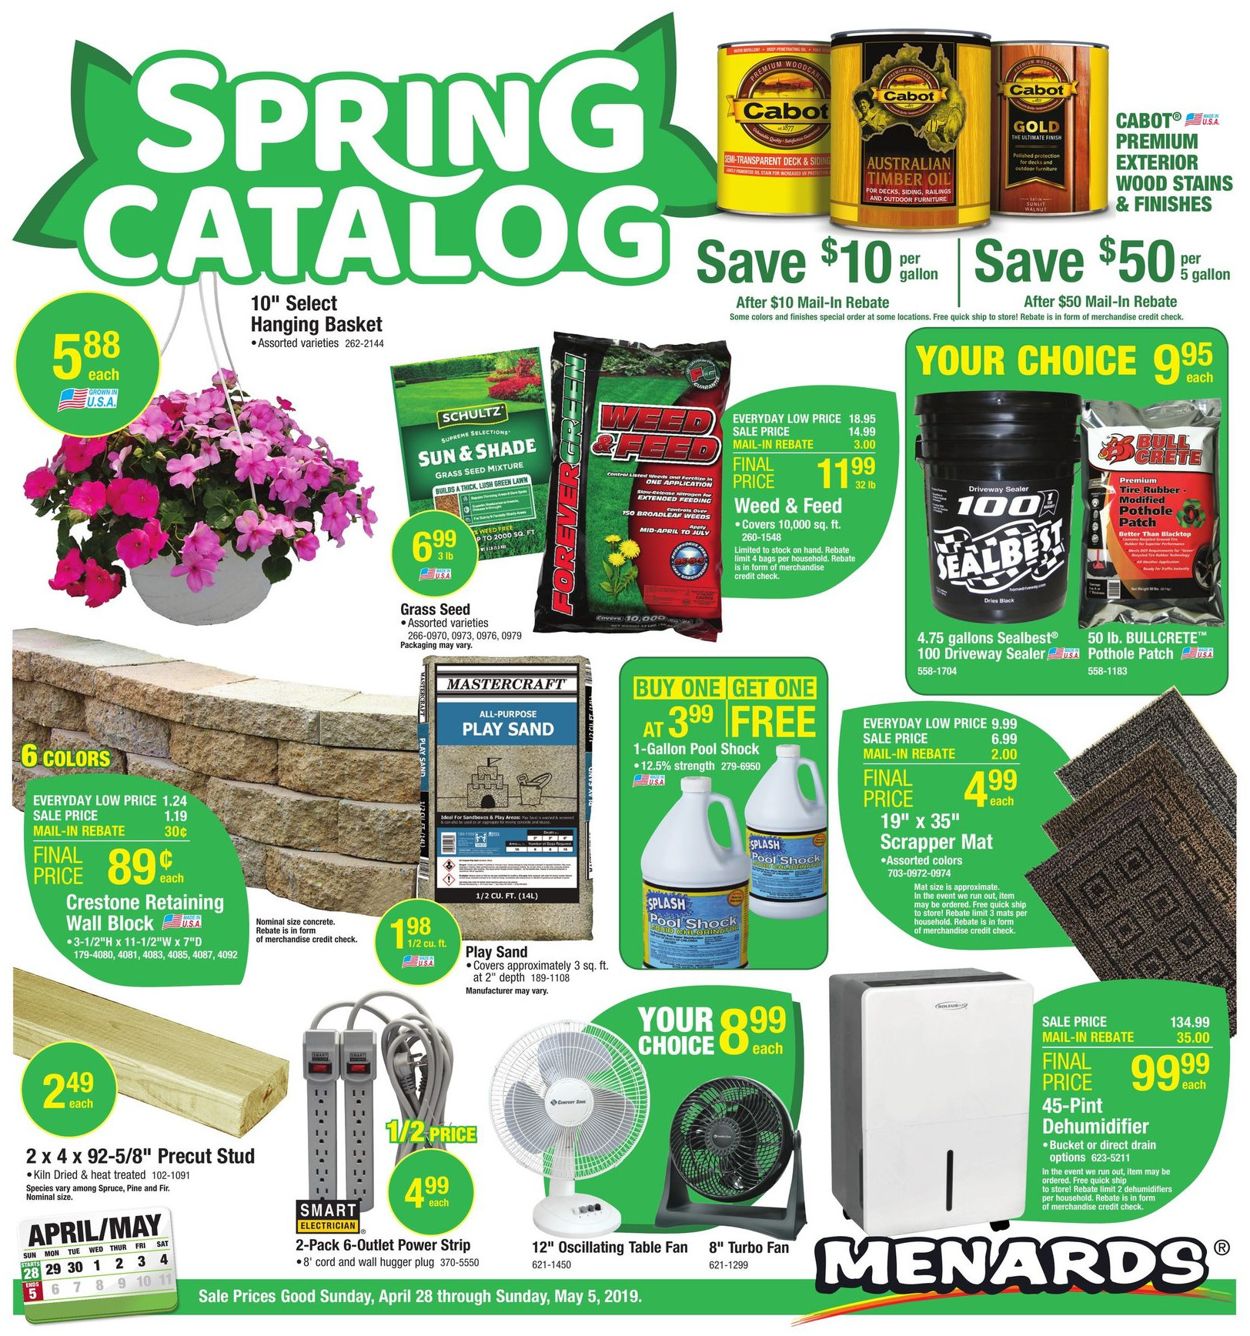 Menards Current weekly ad 04/28 - 05/05/2019 [3] - 0